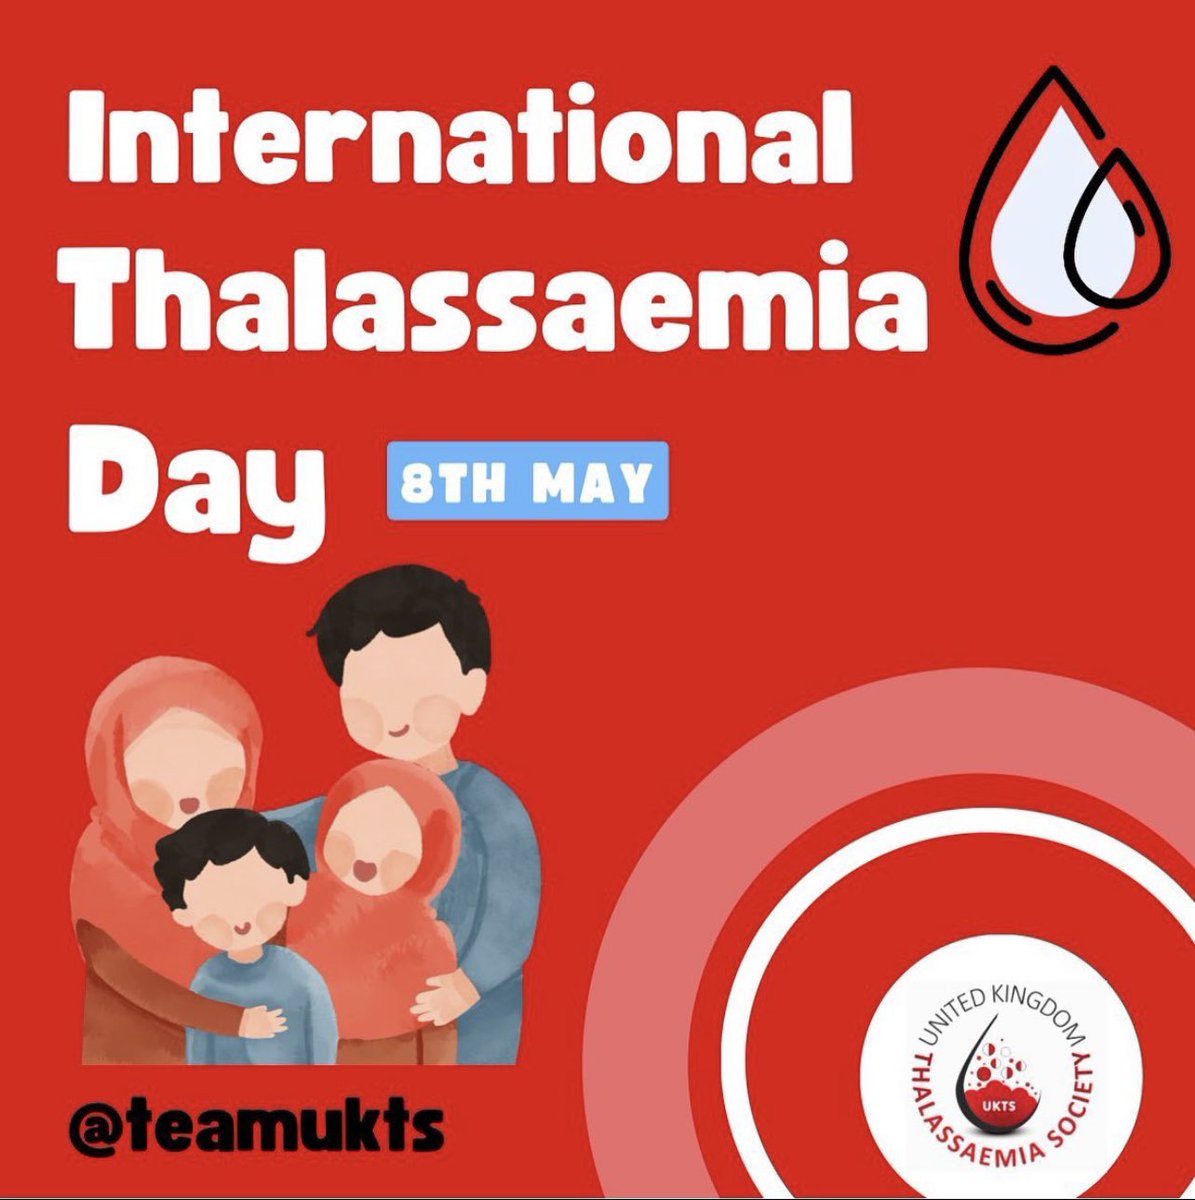 Happy International Thalassaemia Day! Today, we join hands with our friends & societies around the world to remember our angels lost & to raise awareness and the standards of care for managing #thalassaemia Here’s to an exciting, healthier & happier future for all. #teamukts